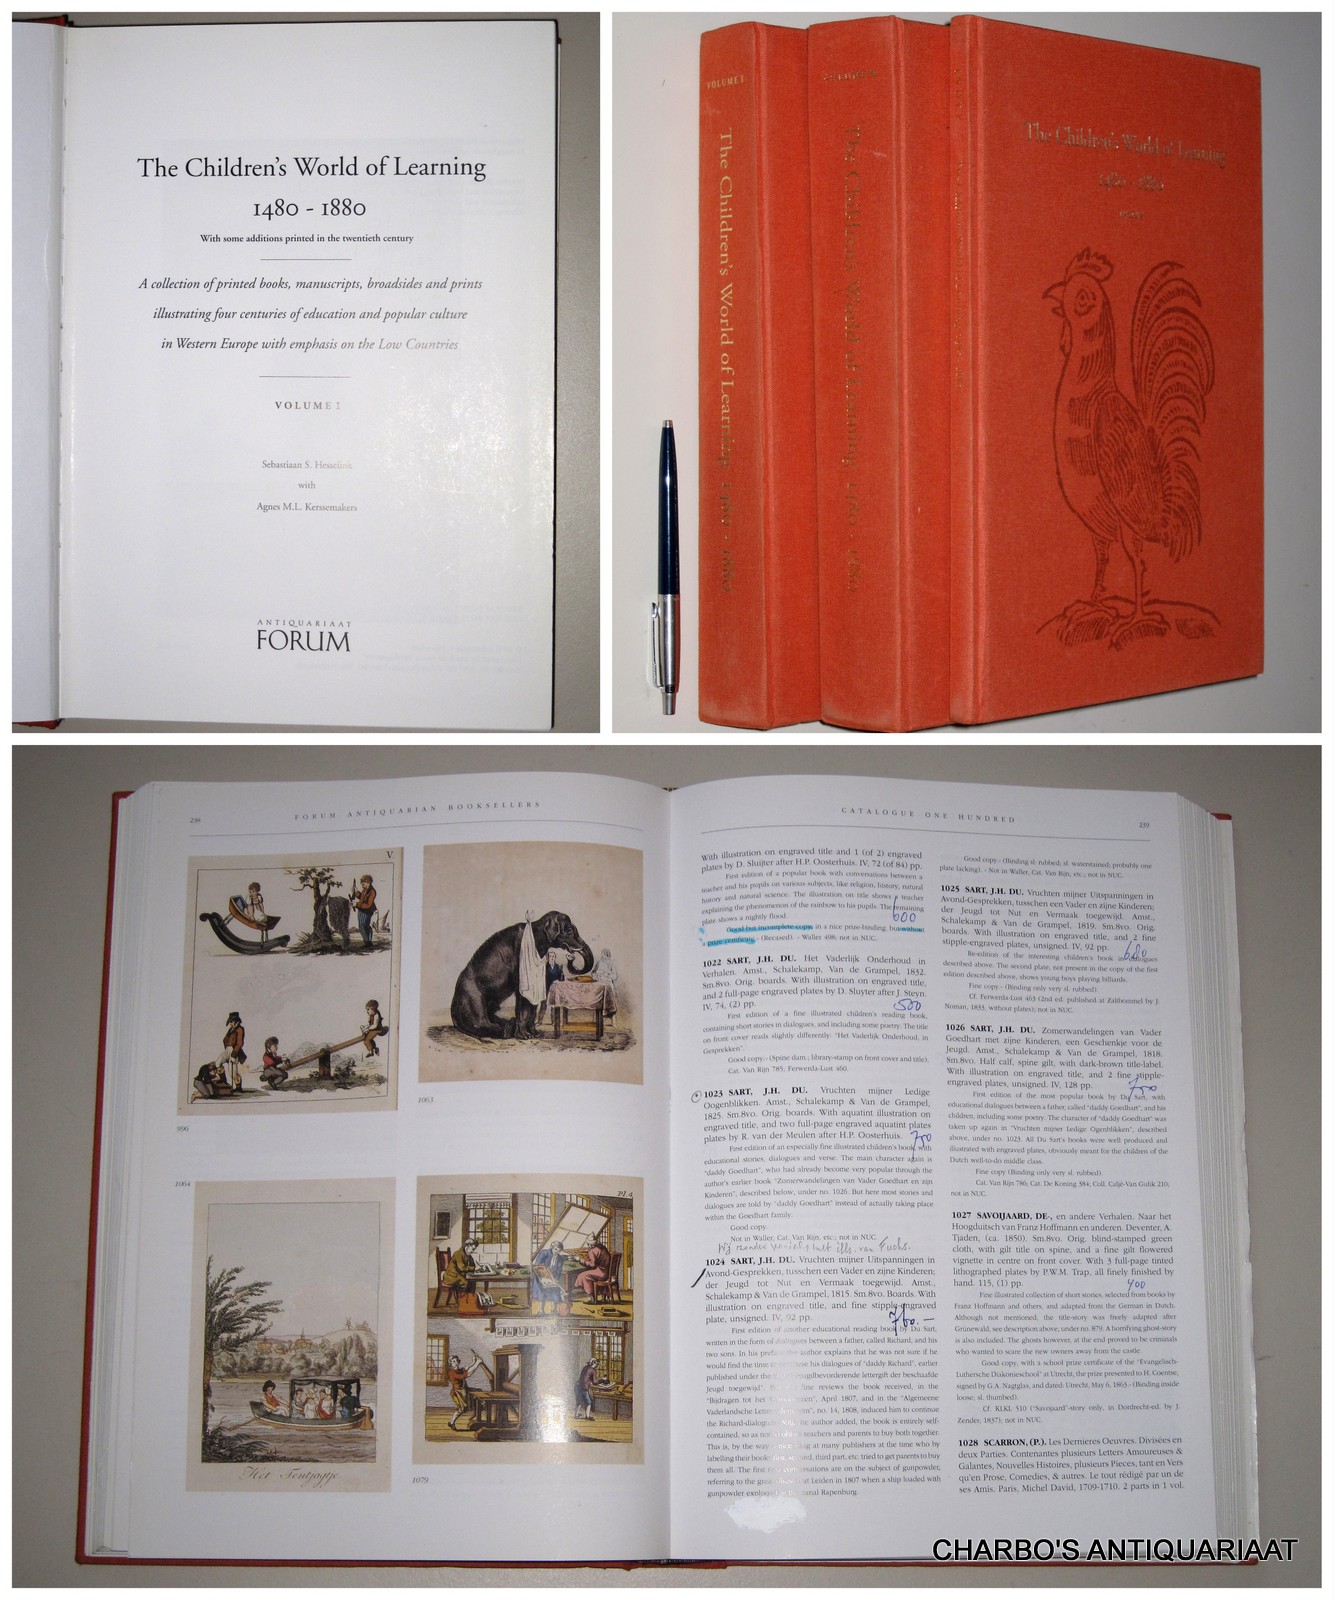 HESSELINK, S.S. & KERSSEMAKERS, A.M.L., -  The children's world of learning 1480-1880. A collection of printed books, manuscripts, broadsides and prints illustrating four centuries of education and popular culture in Western Europe with emphasis on the Low Countries.